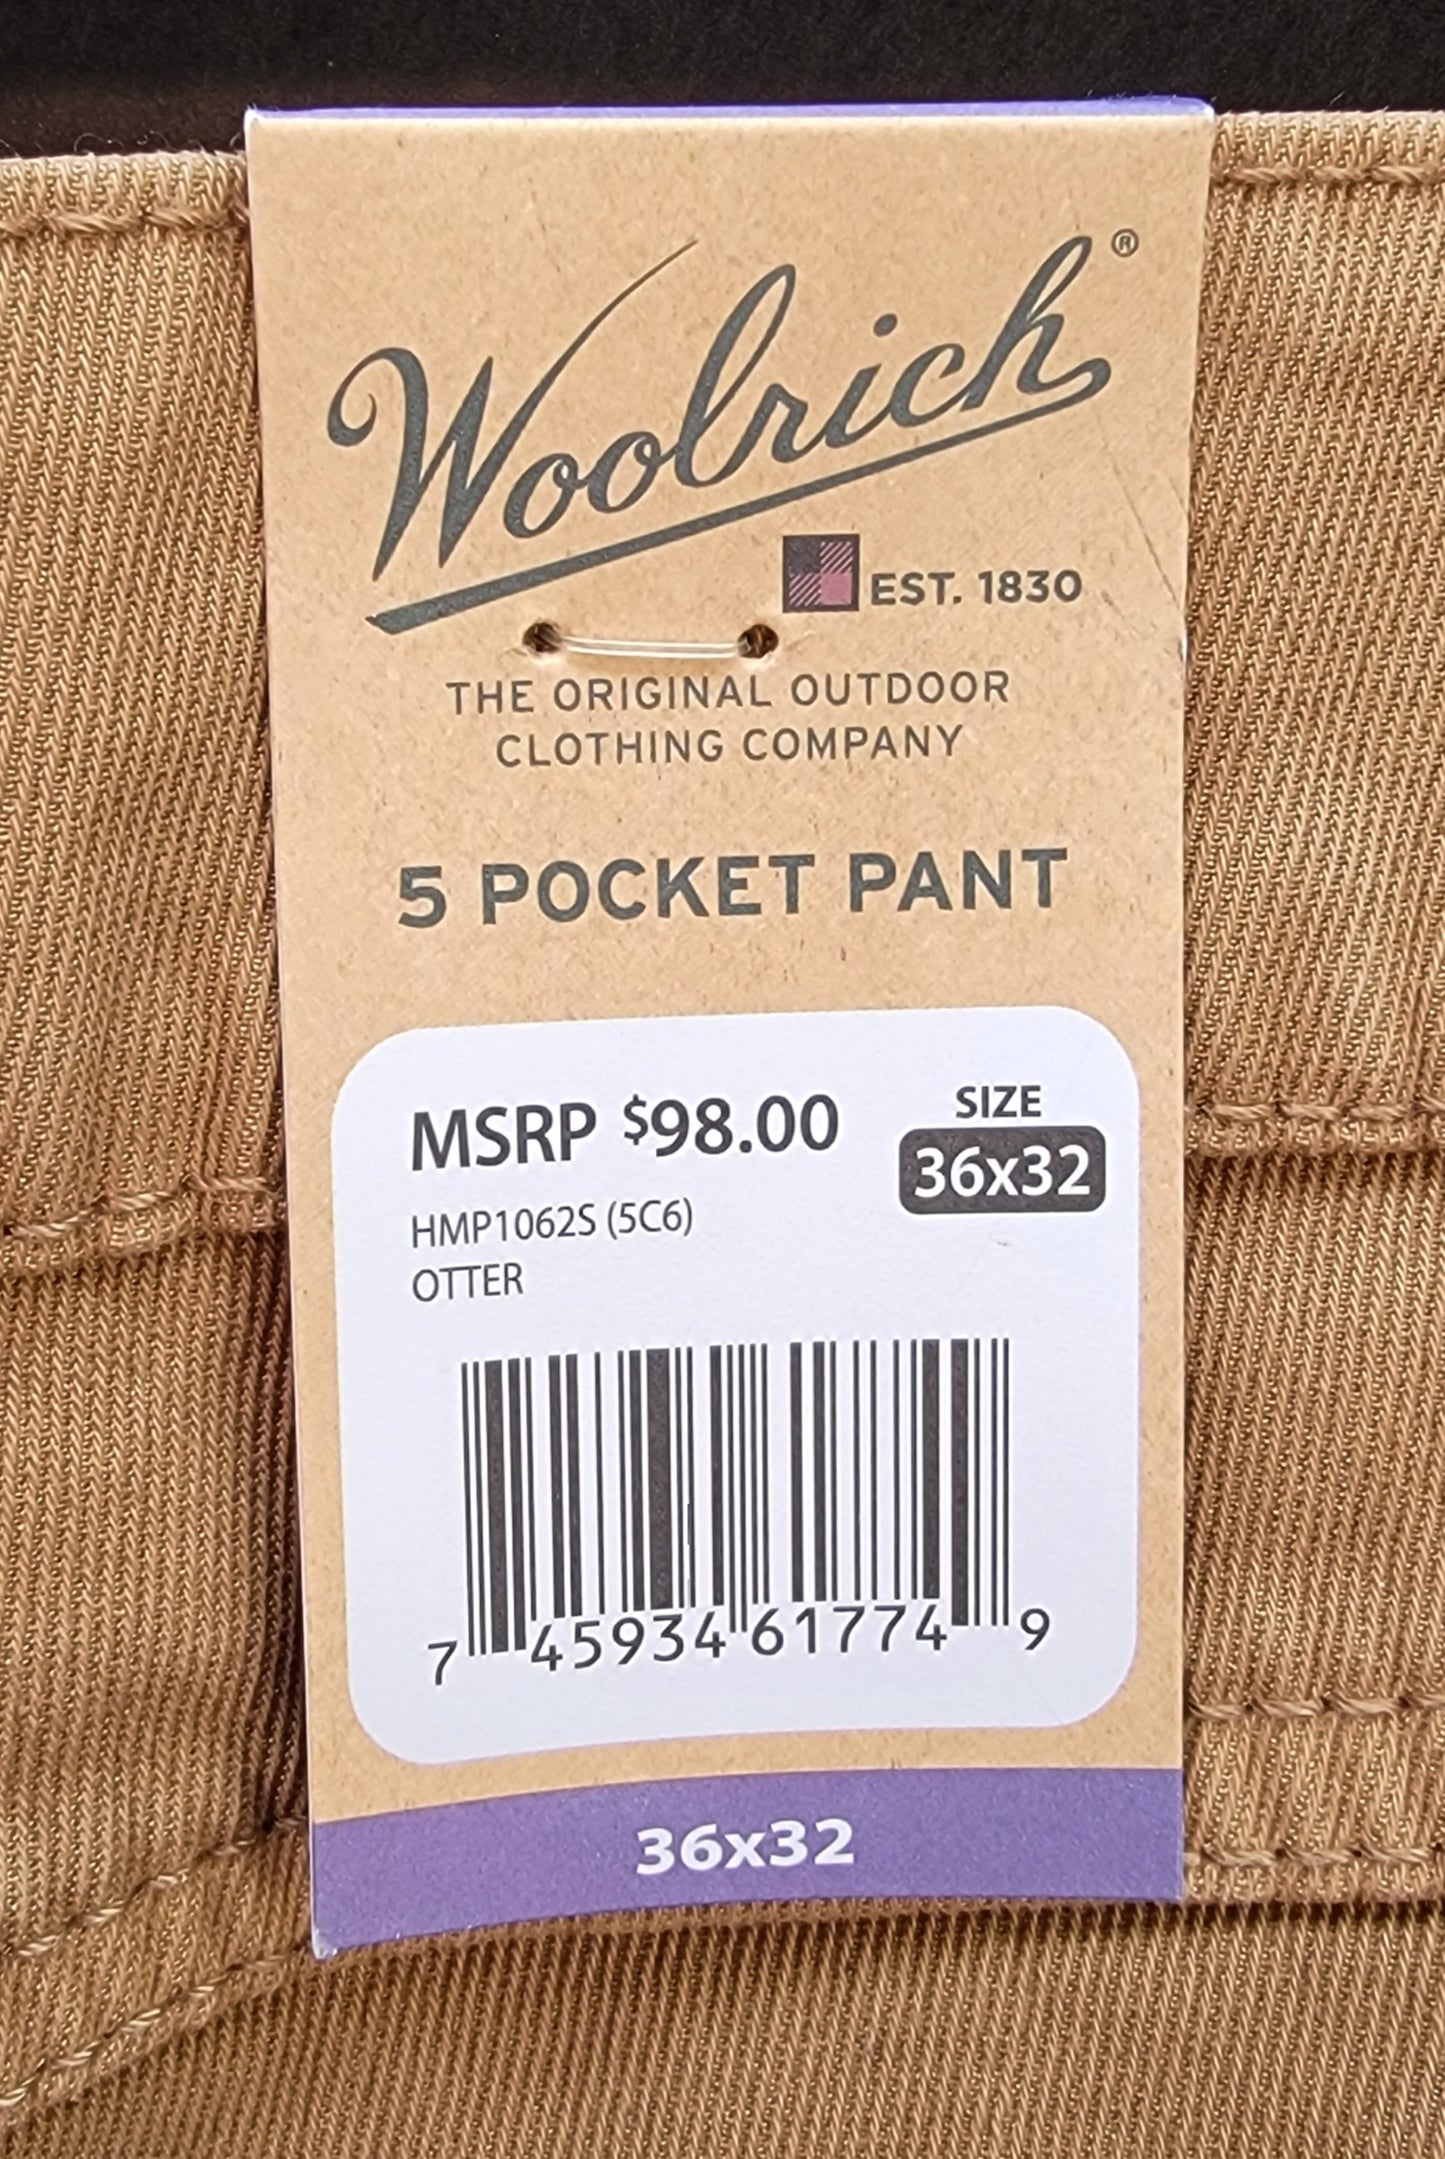 Woolrich Men's 5 Pocket Pant, Color Otter, Size 36X32 Retail $98.00 New with Tags